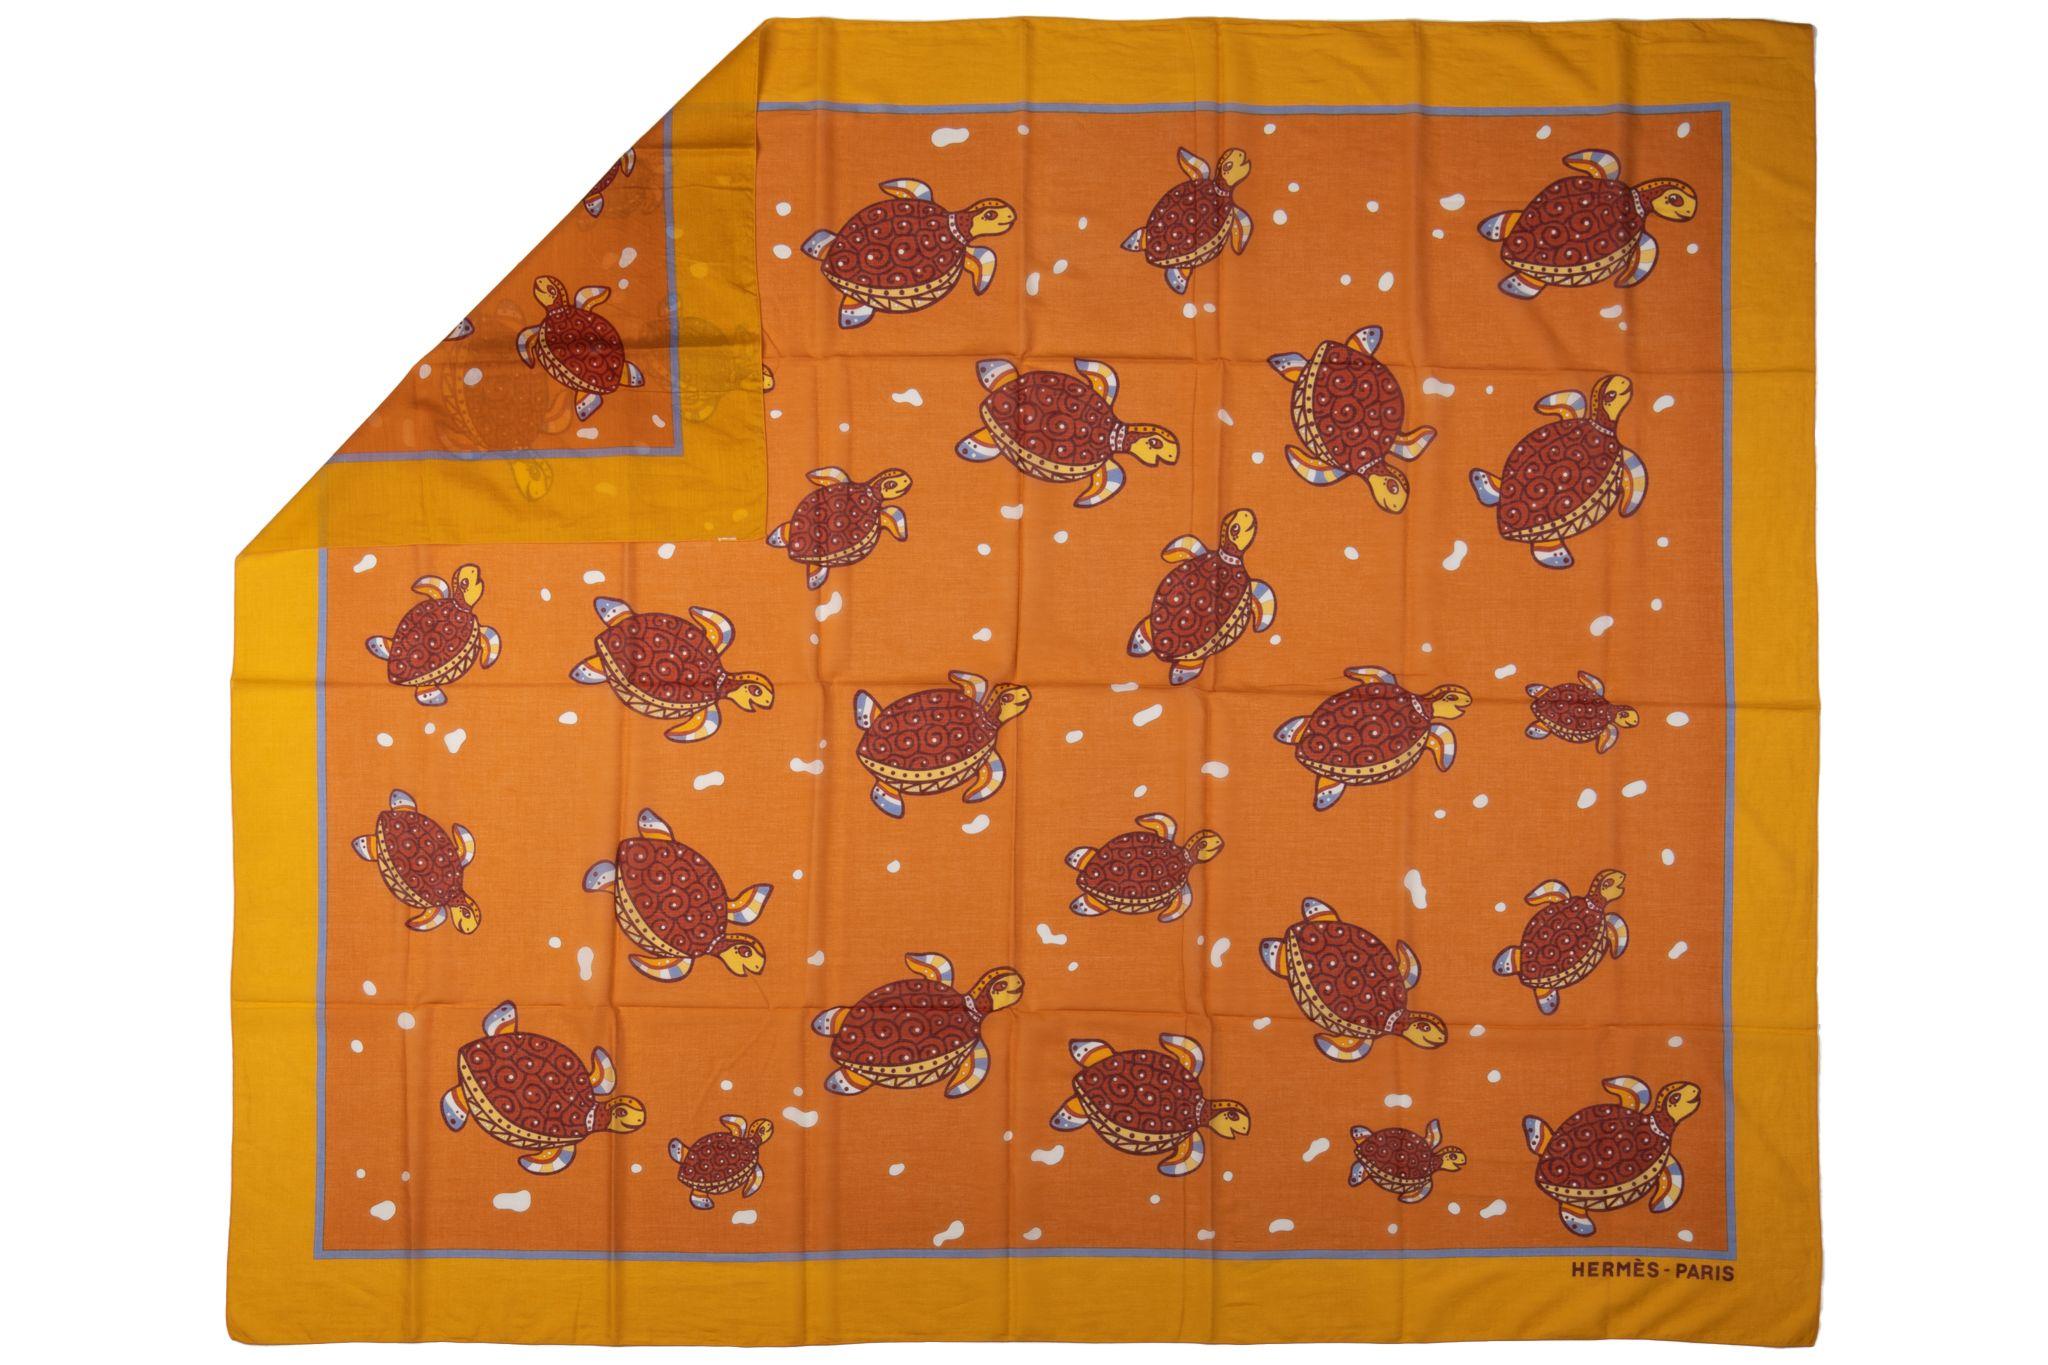 Hermes cotton oversize shawl / sarong with turtles design. Does not include box. No label .
